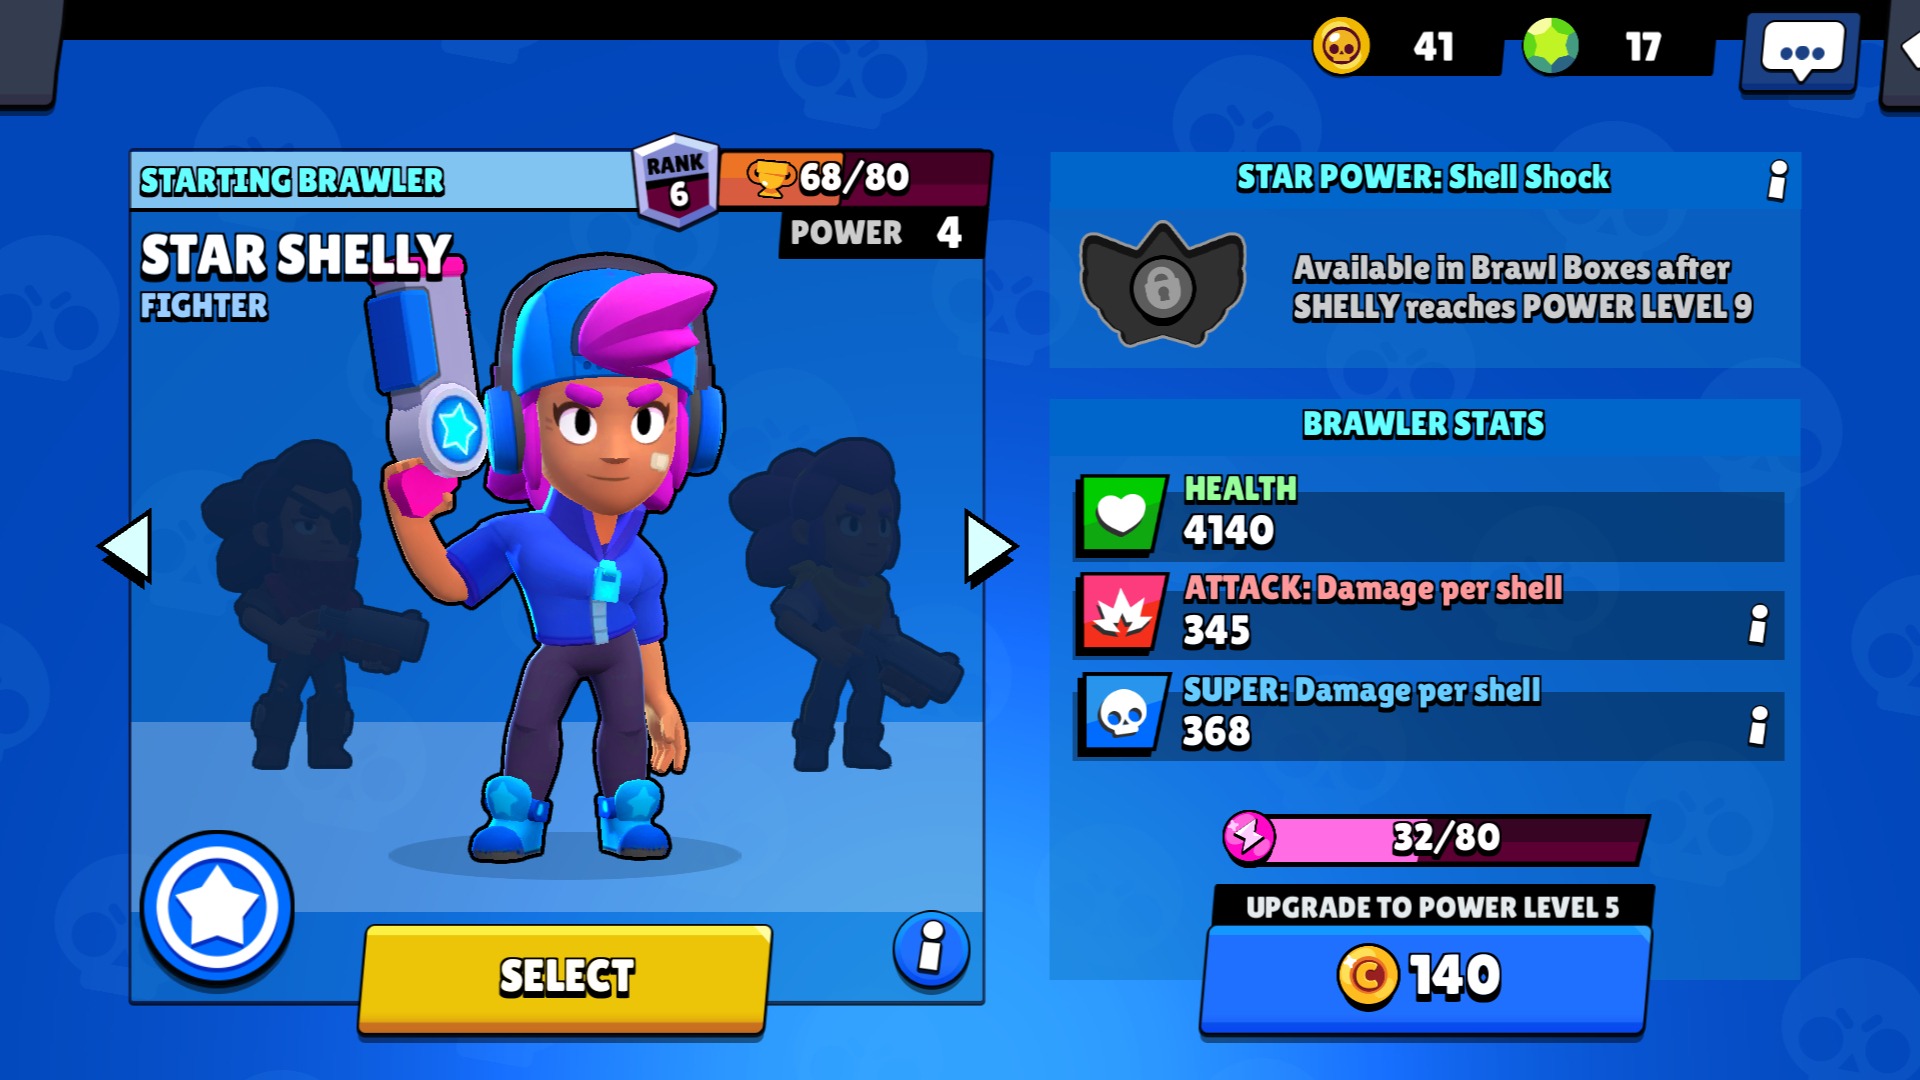 Brawl Stars Tips And Tricks Best Brawlers How To Get Star Tokens More - brawl stars star pwoer ranking